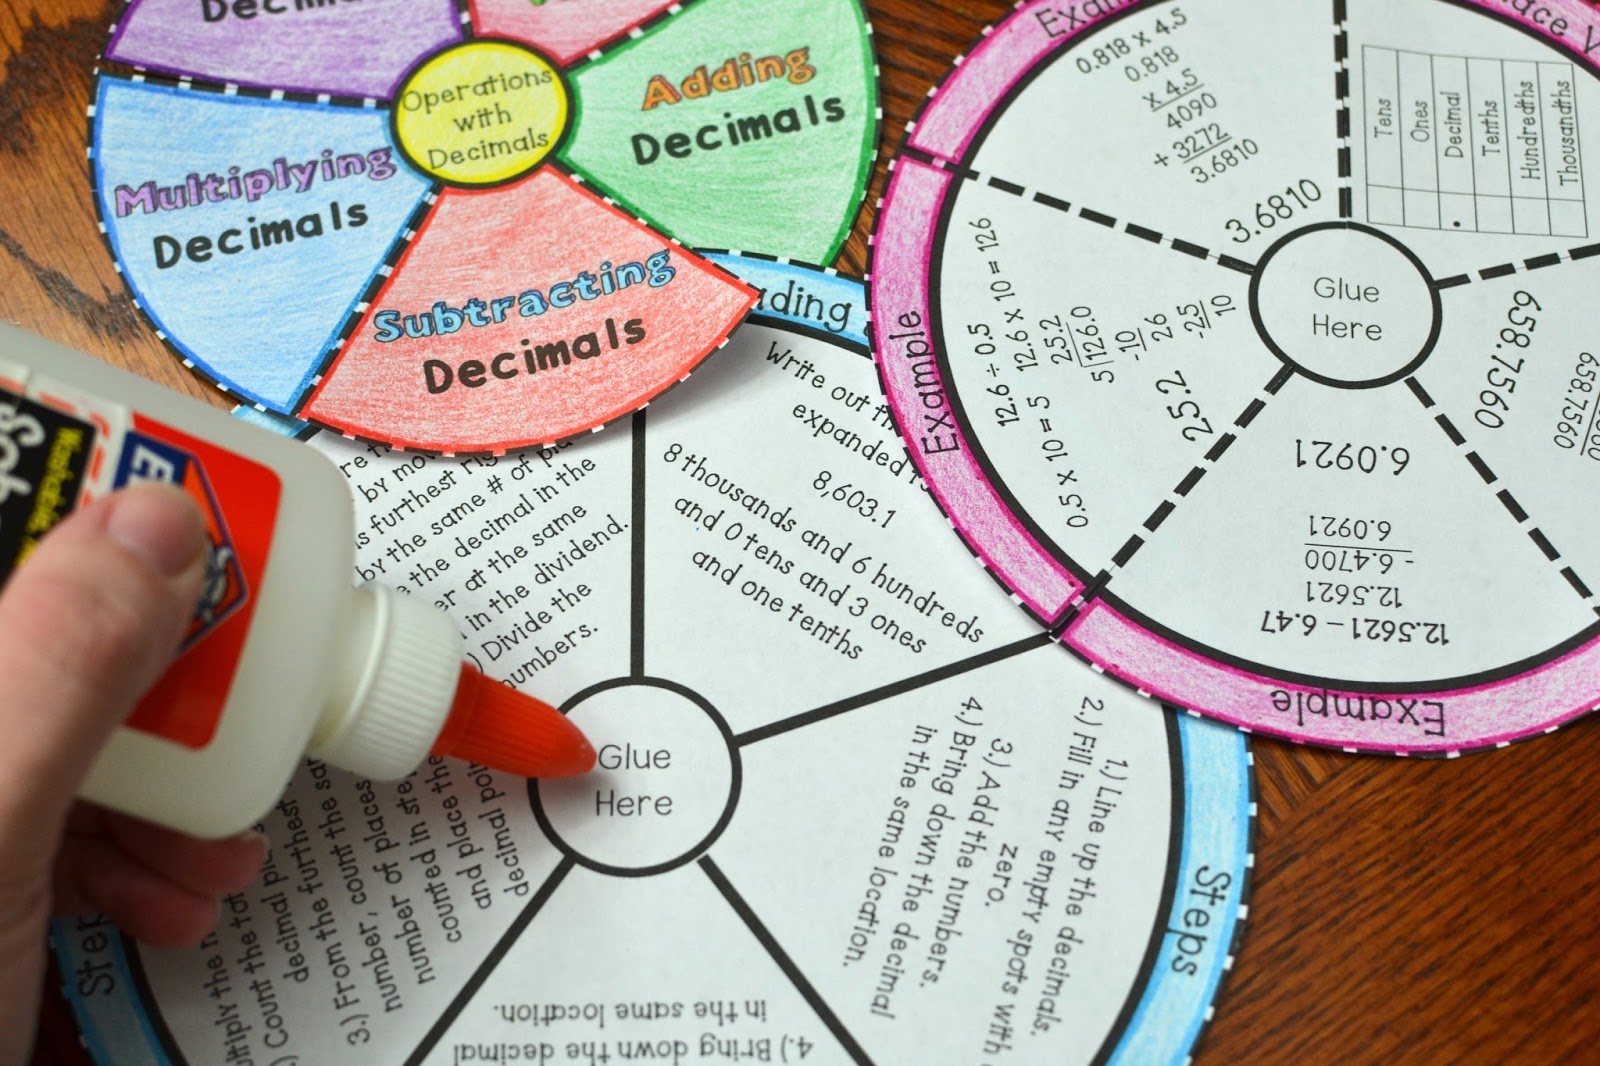 math-in-demand-operations-with-decimals-wheel-foldable-adding